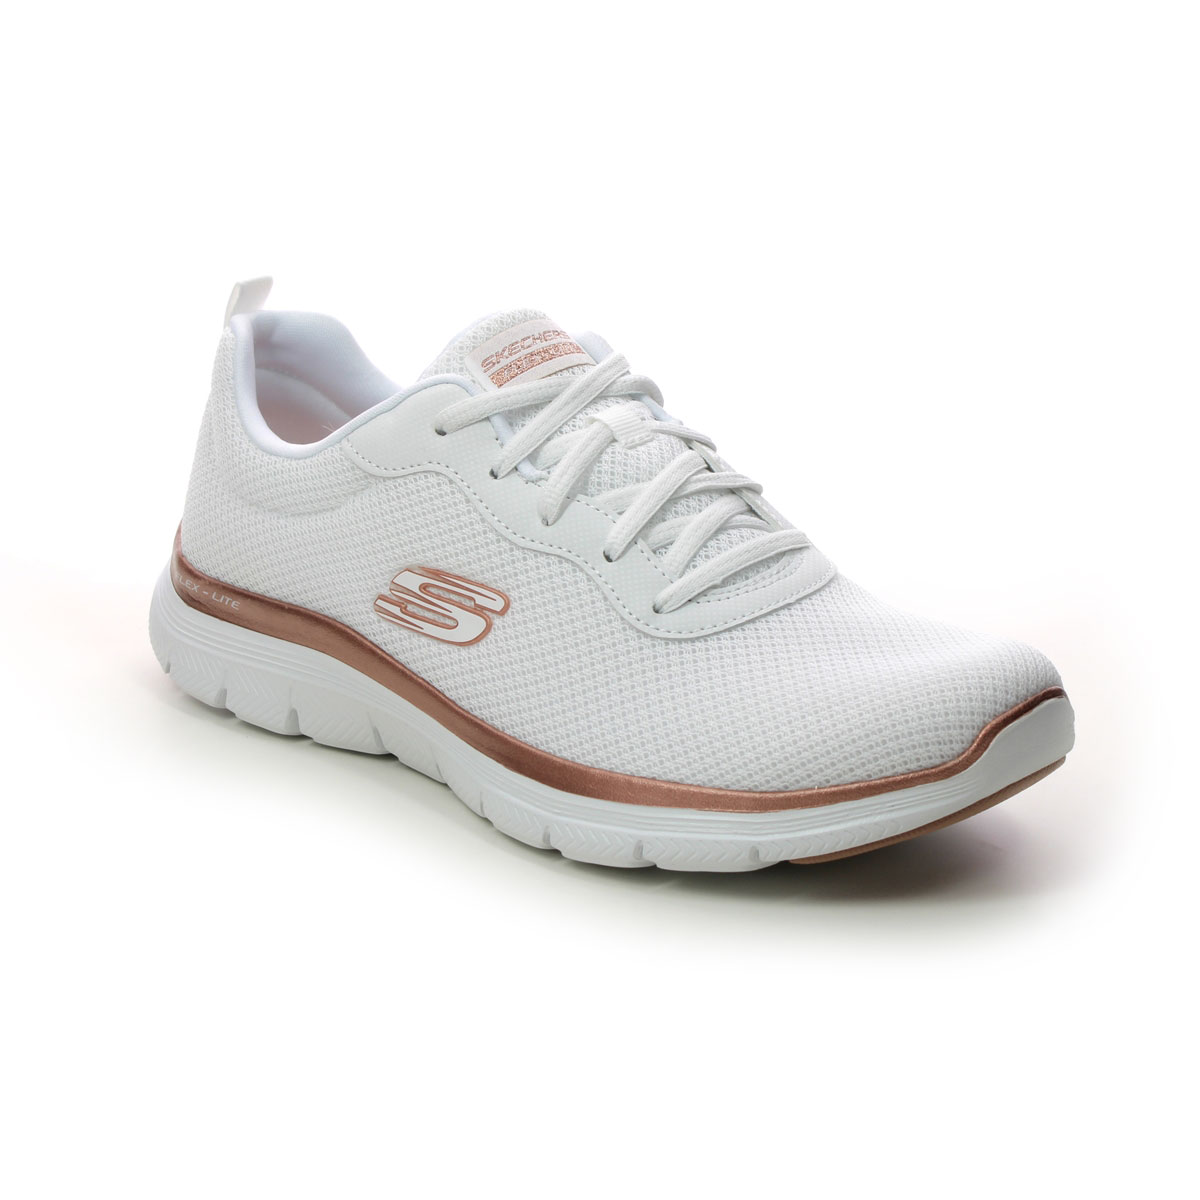 Skechers Flex Appeal 4.0 White Rose Gold Womens Trainers 149303 In Size 3 In Plain White Rose Gold